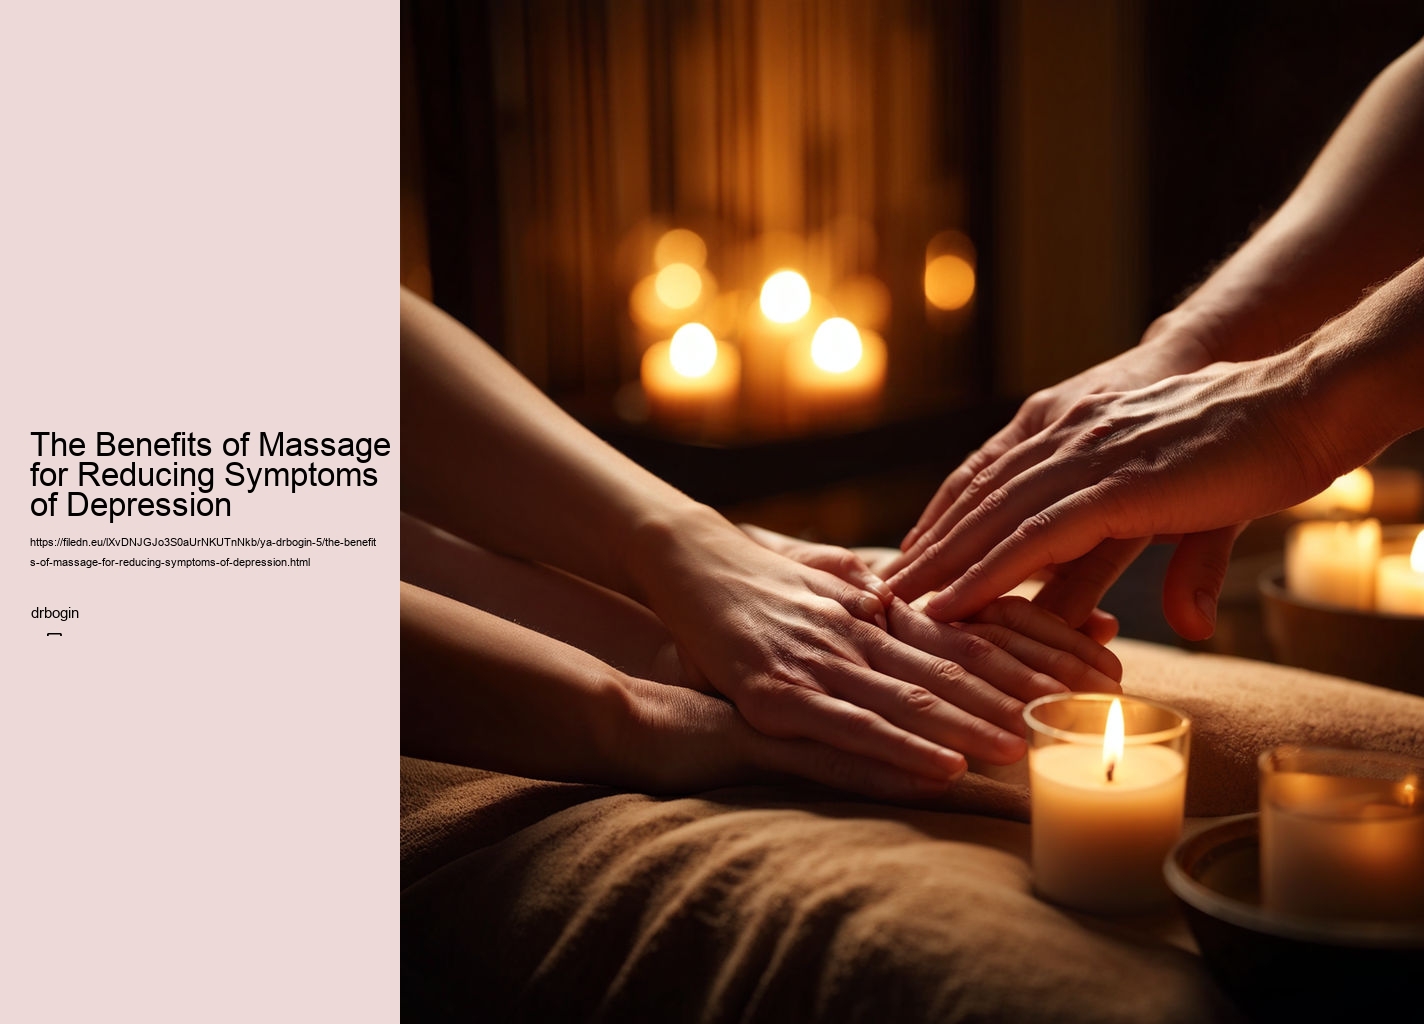 The Benefits of Massage for Reducing Symptoms of Depression